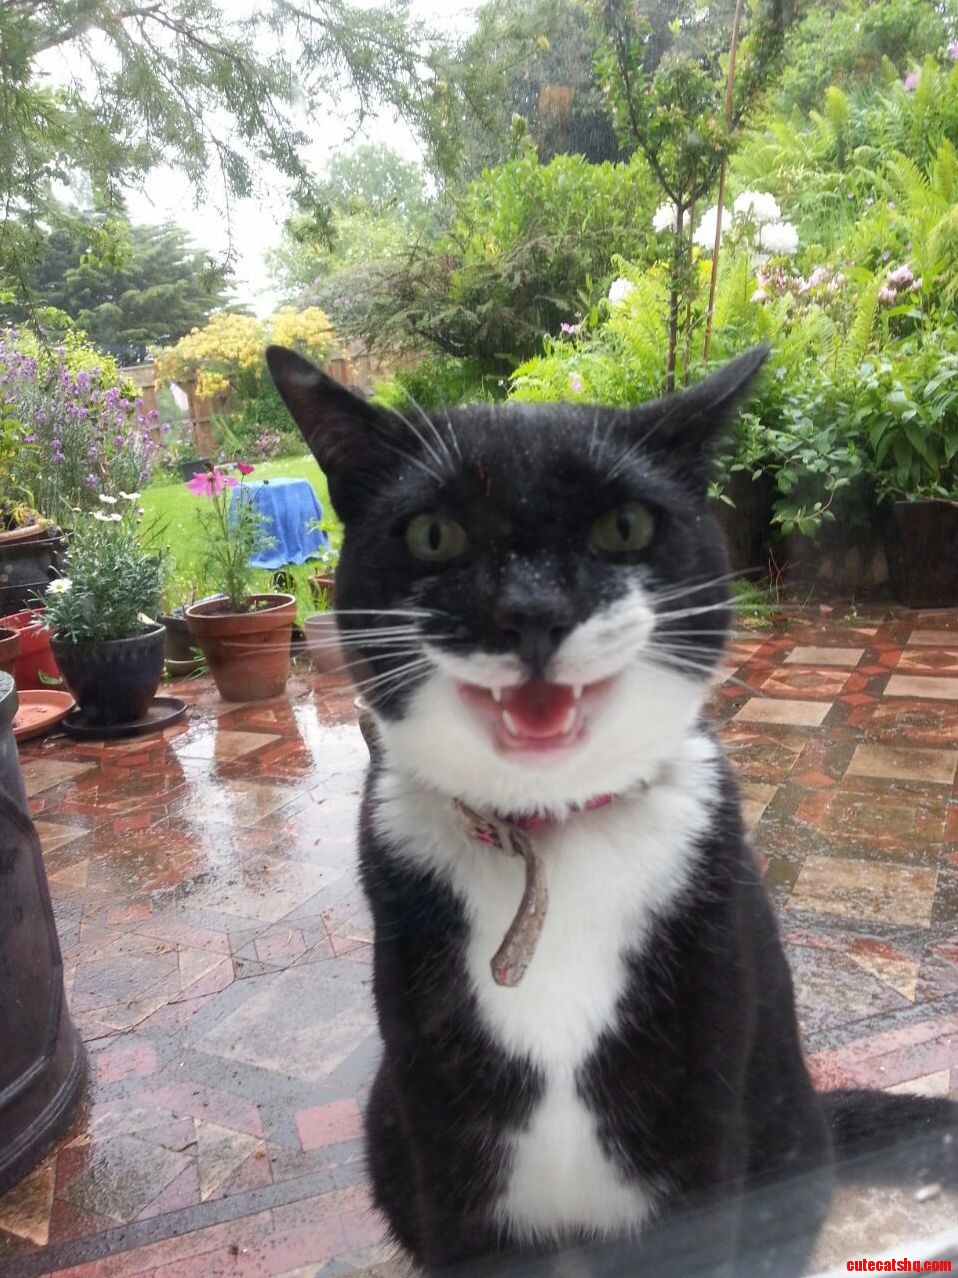 My cats face when he realised i was going to take a photo of him through the window before letting him come inside from the rain.